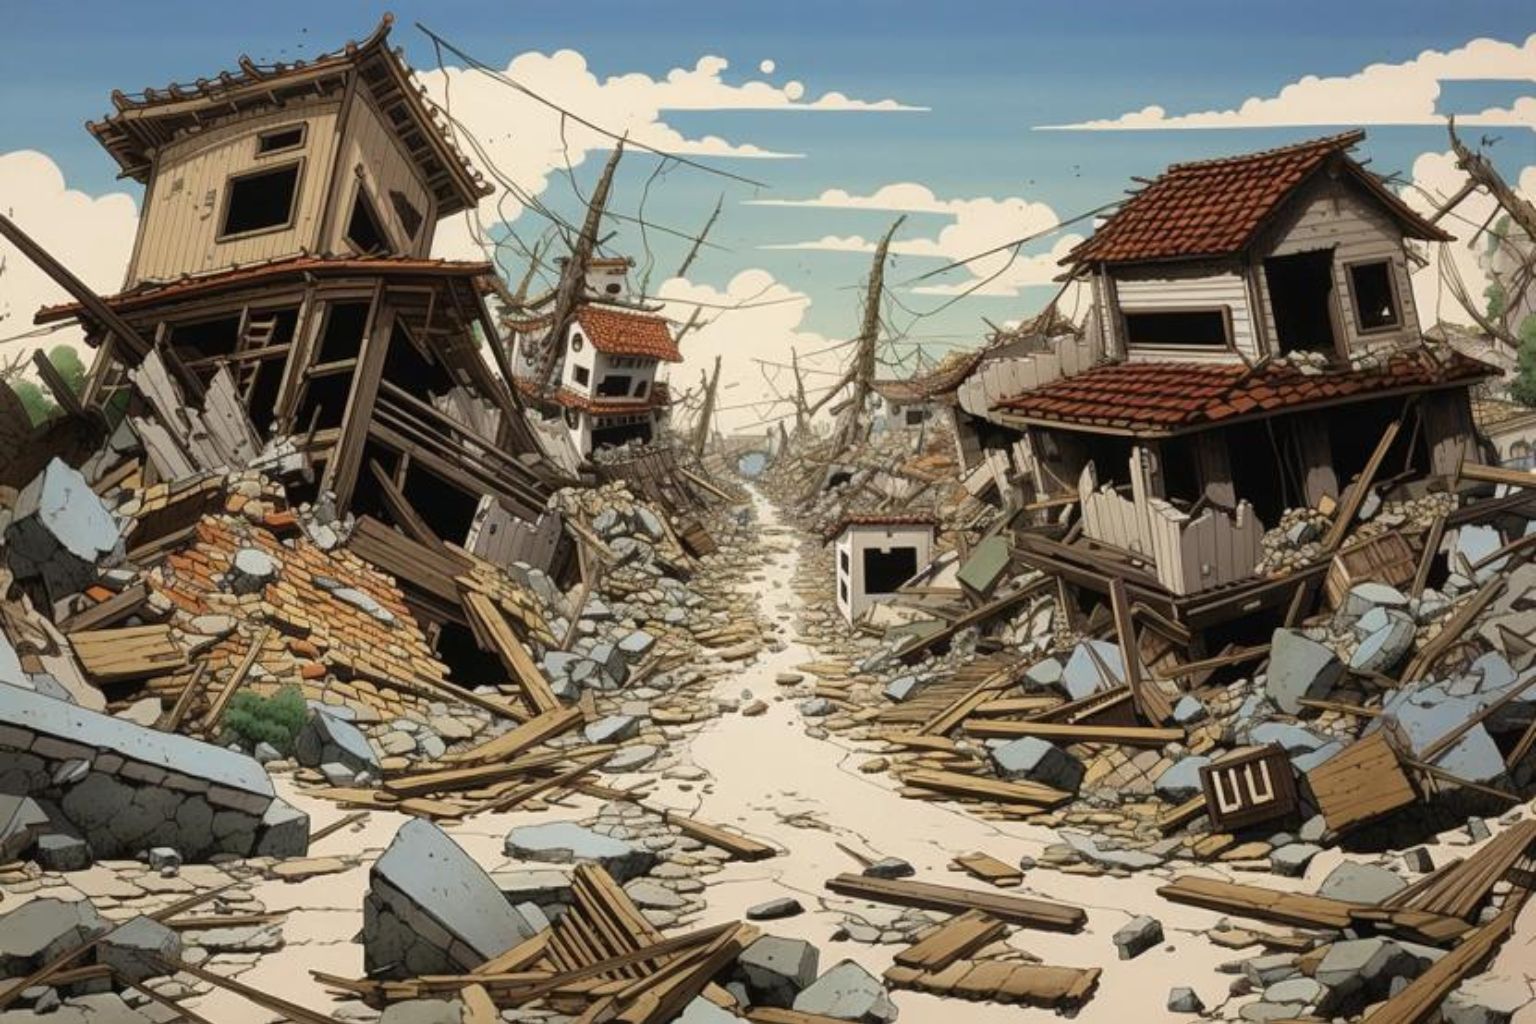 We're very lucky. The devastating earthquake that struck Japan last week caused only minor damage here in the States.